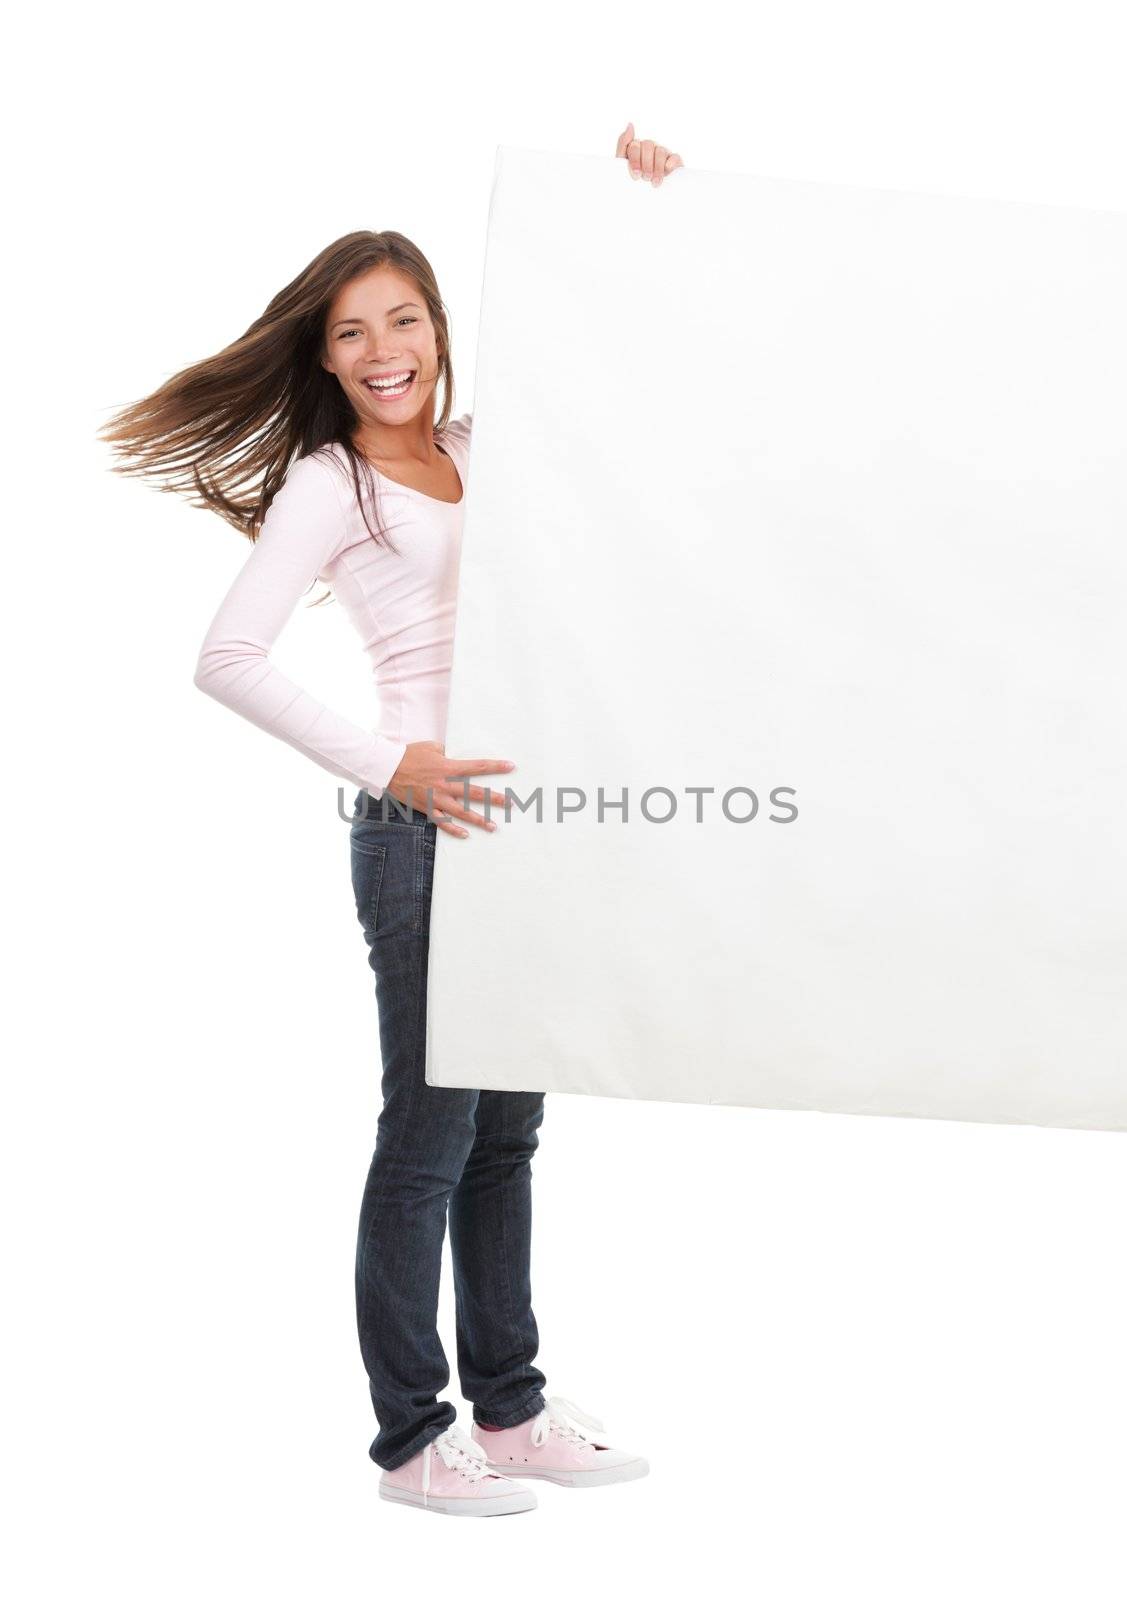 Billboard woman - beautiful young student woman holding sign. Dynamic full length image of woman holding a white blank board / placard. Beautiful mixed race asian / caucasian model. Isolated on seamless white background.